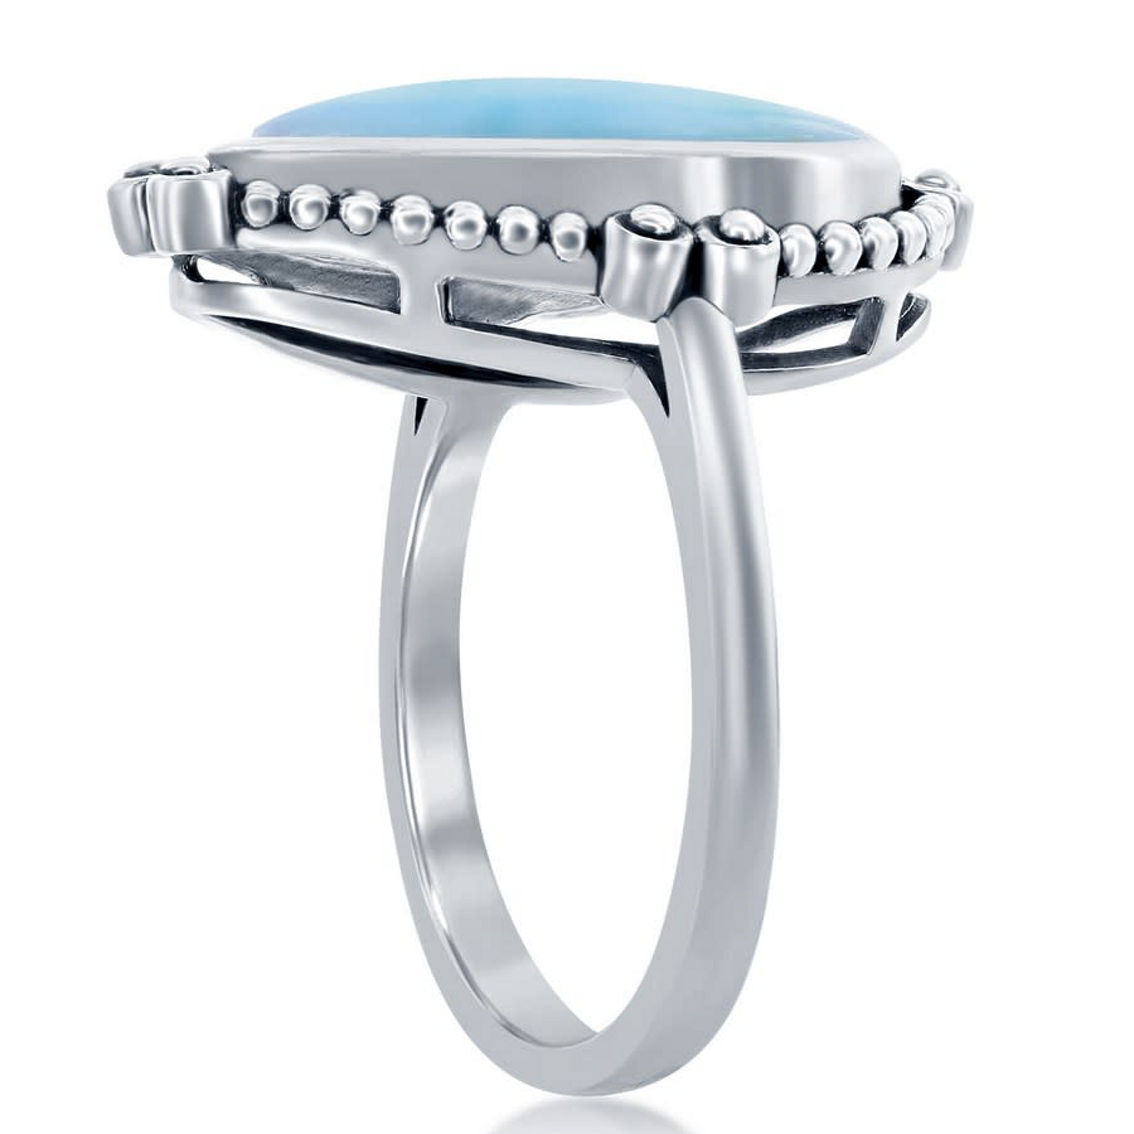 Caribbean Treasures Sterling Silver Pear-Shaped Larimar Designed Oxidized Ring - Image 2 of 3